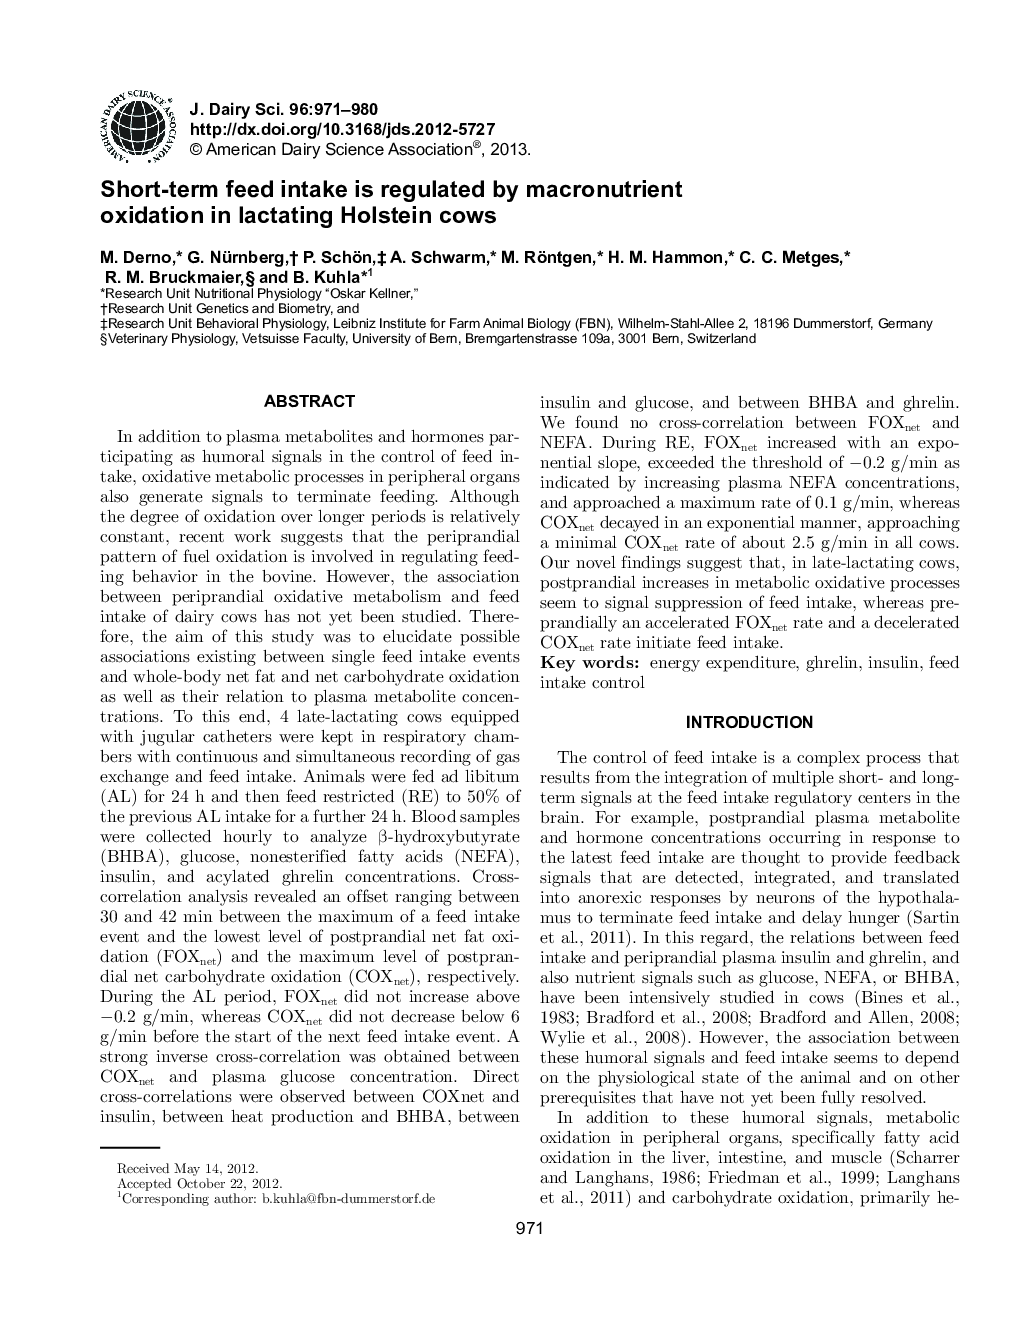 Short-term feed intake is regulated by macronutrient oxidation in lactating Holstein cows